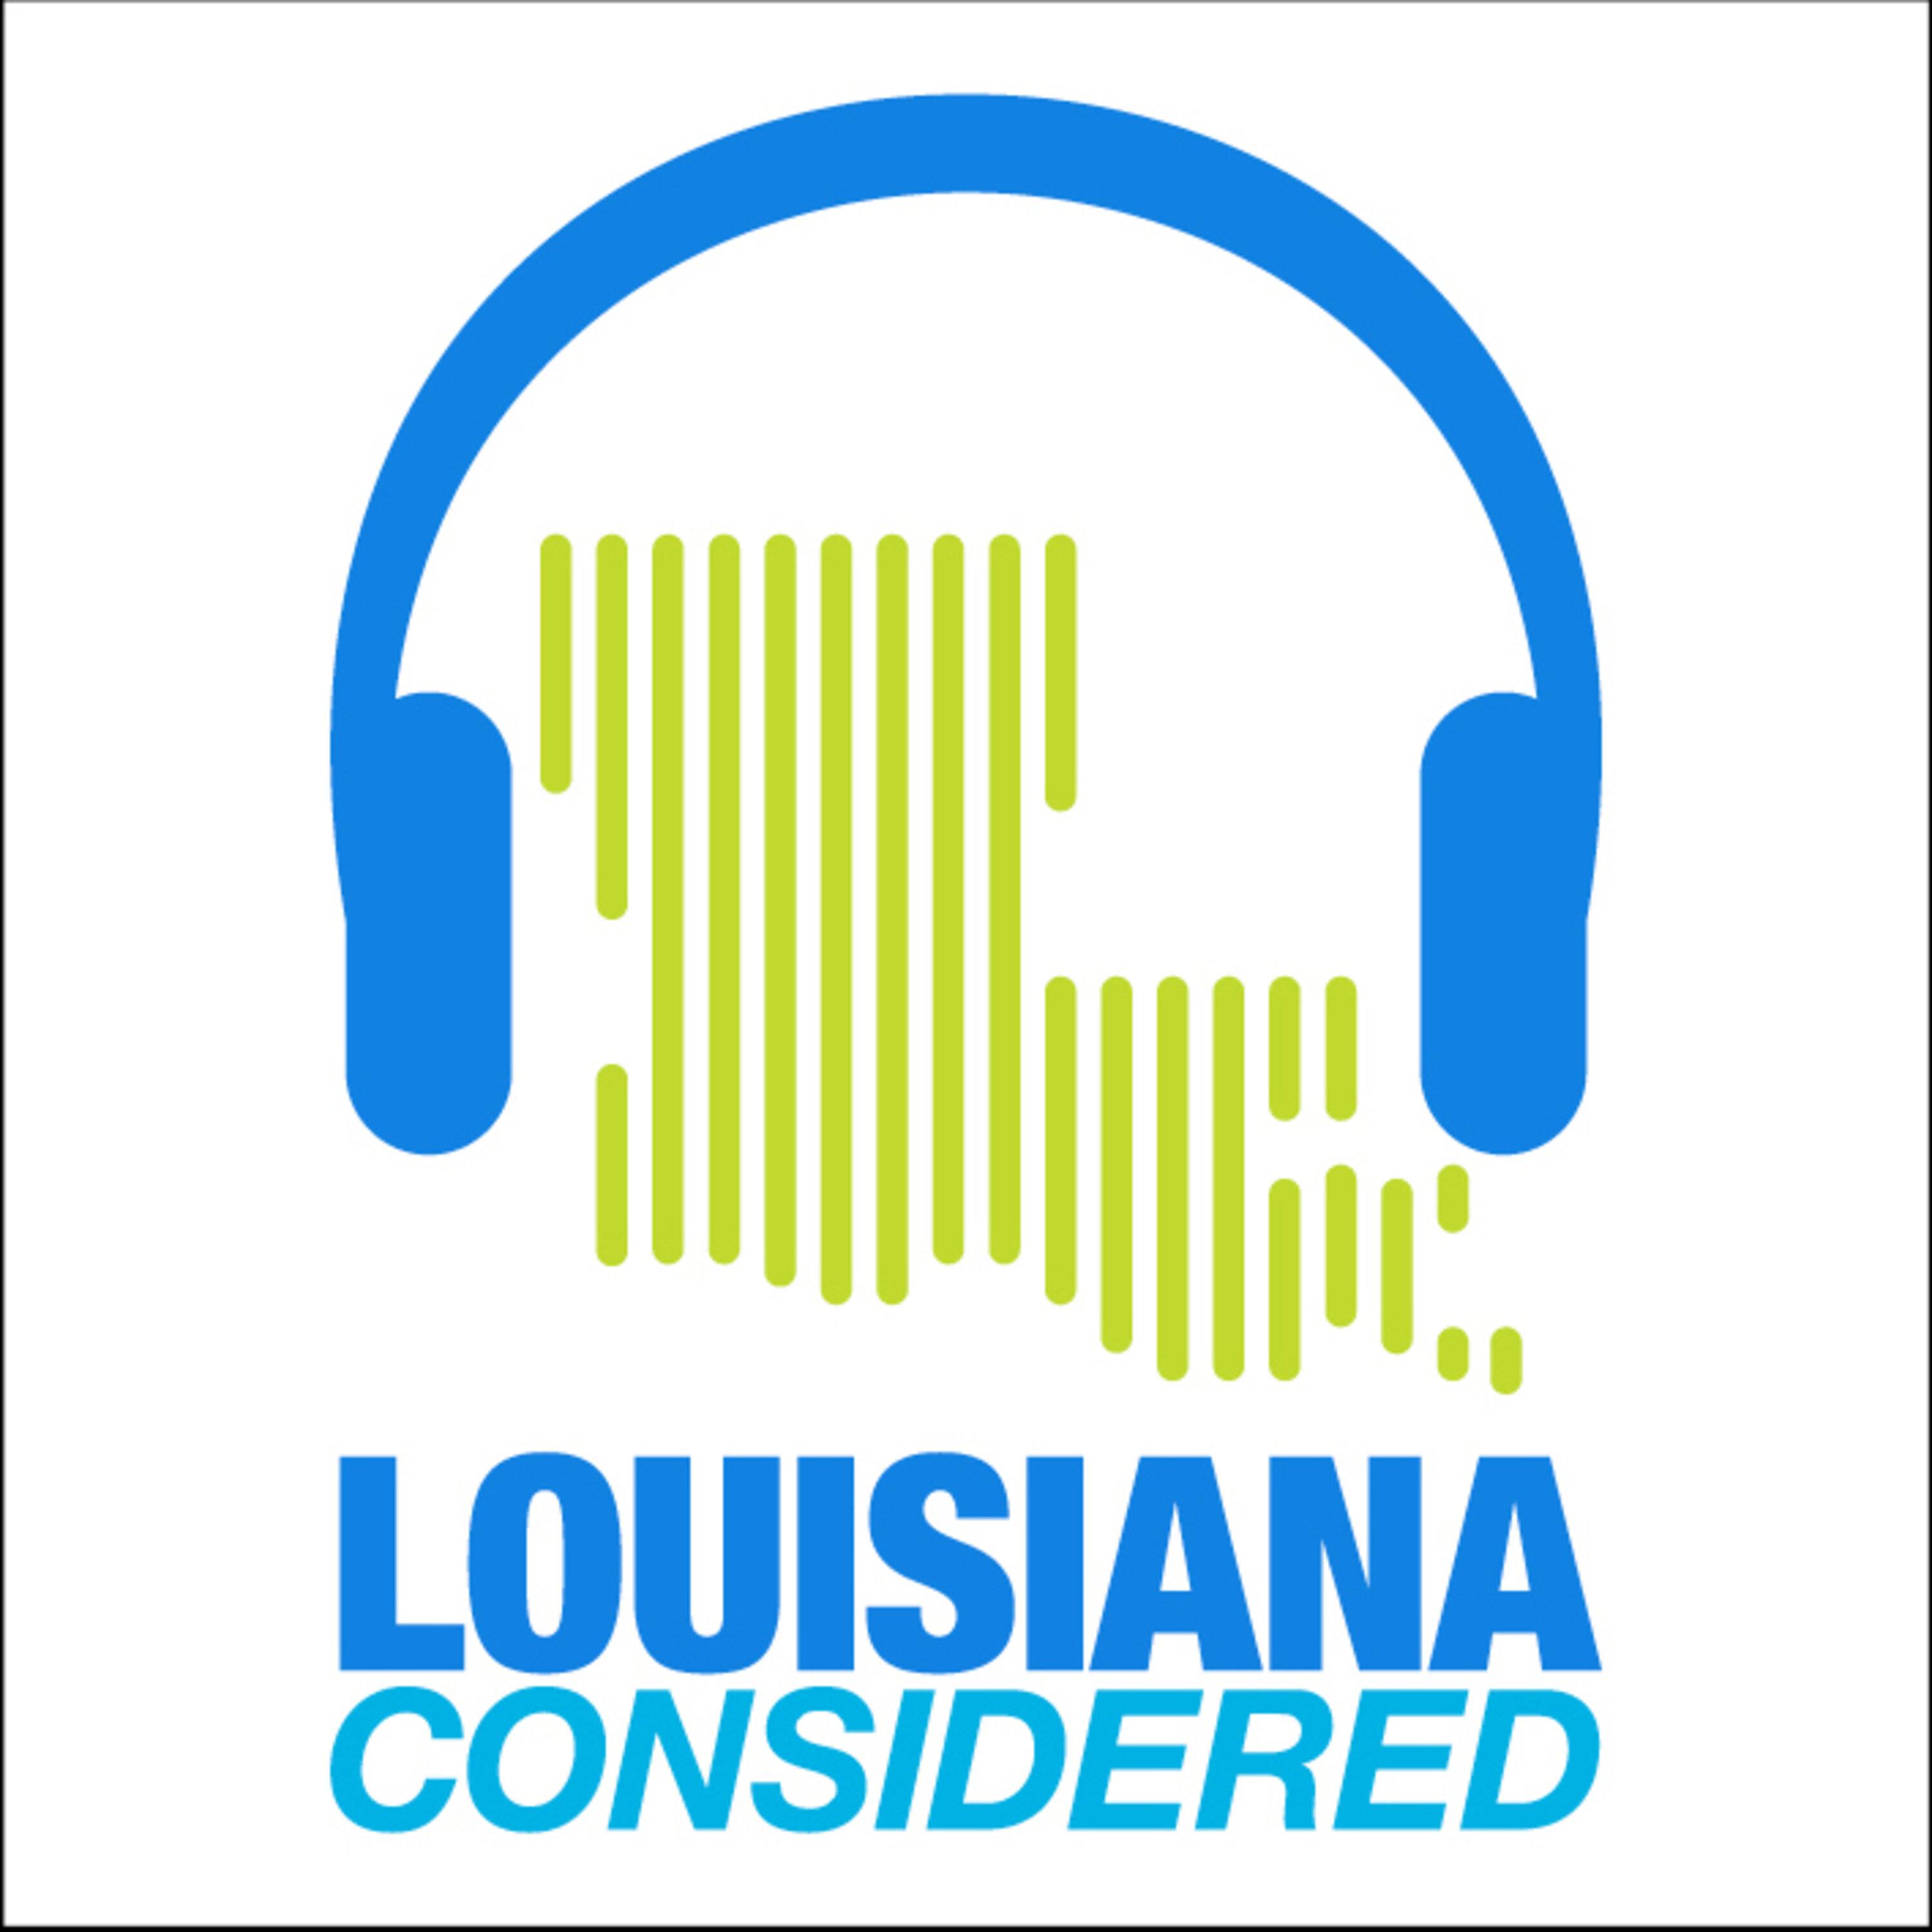 Thumbnail for "Louisiana Considered: DHS Secretary Pushes For Louisiana Vaccinations, New Orleans Opera Returns To Live Performance, What’s Happening At The Newcomb Art Museum".